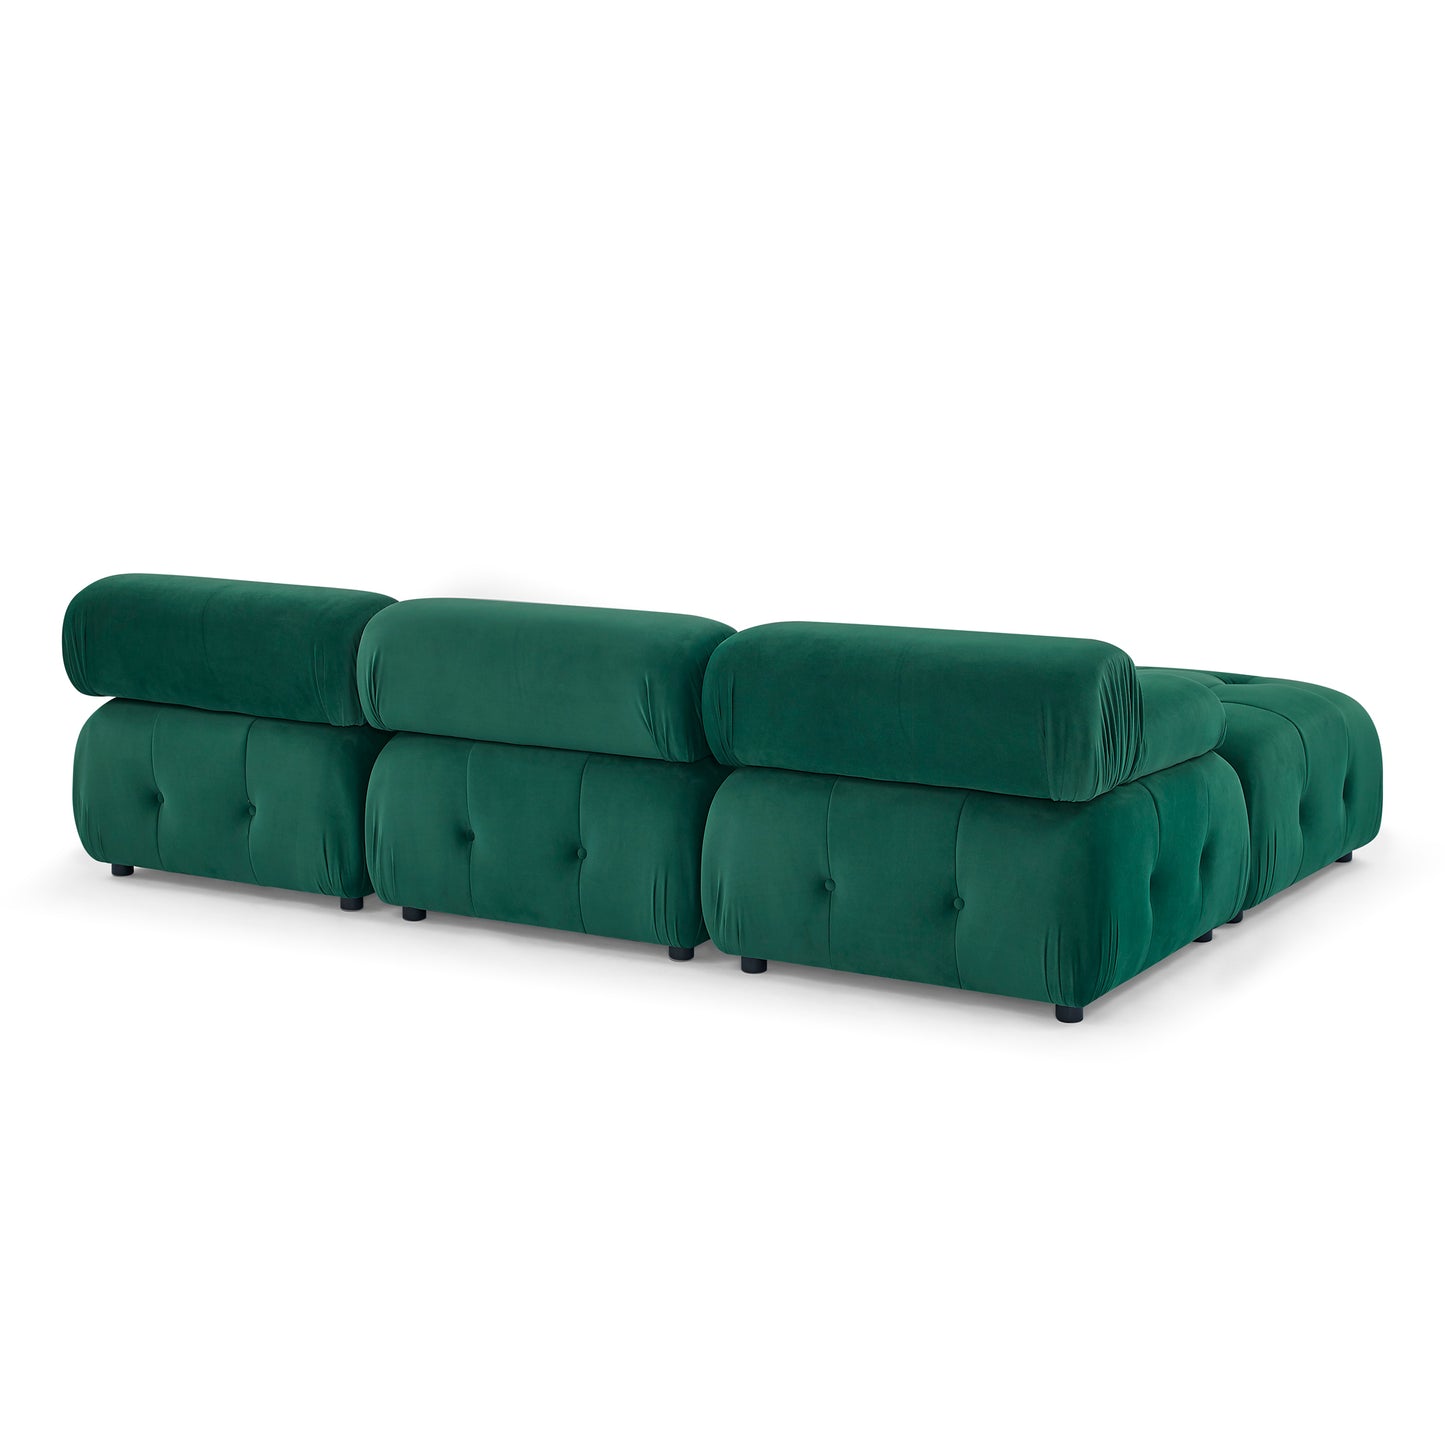 Modular Sectional Sofa, Button Tufted Designed and DIY Combination,L Shaped Couch with Reversible Ottoman, Green Velvet